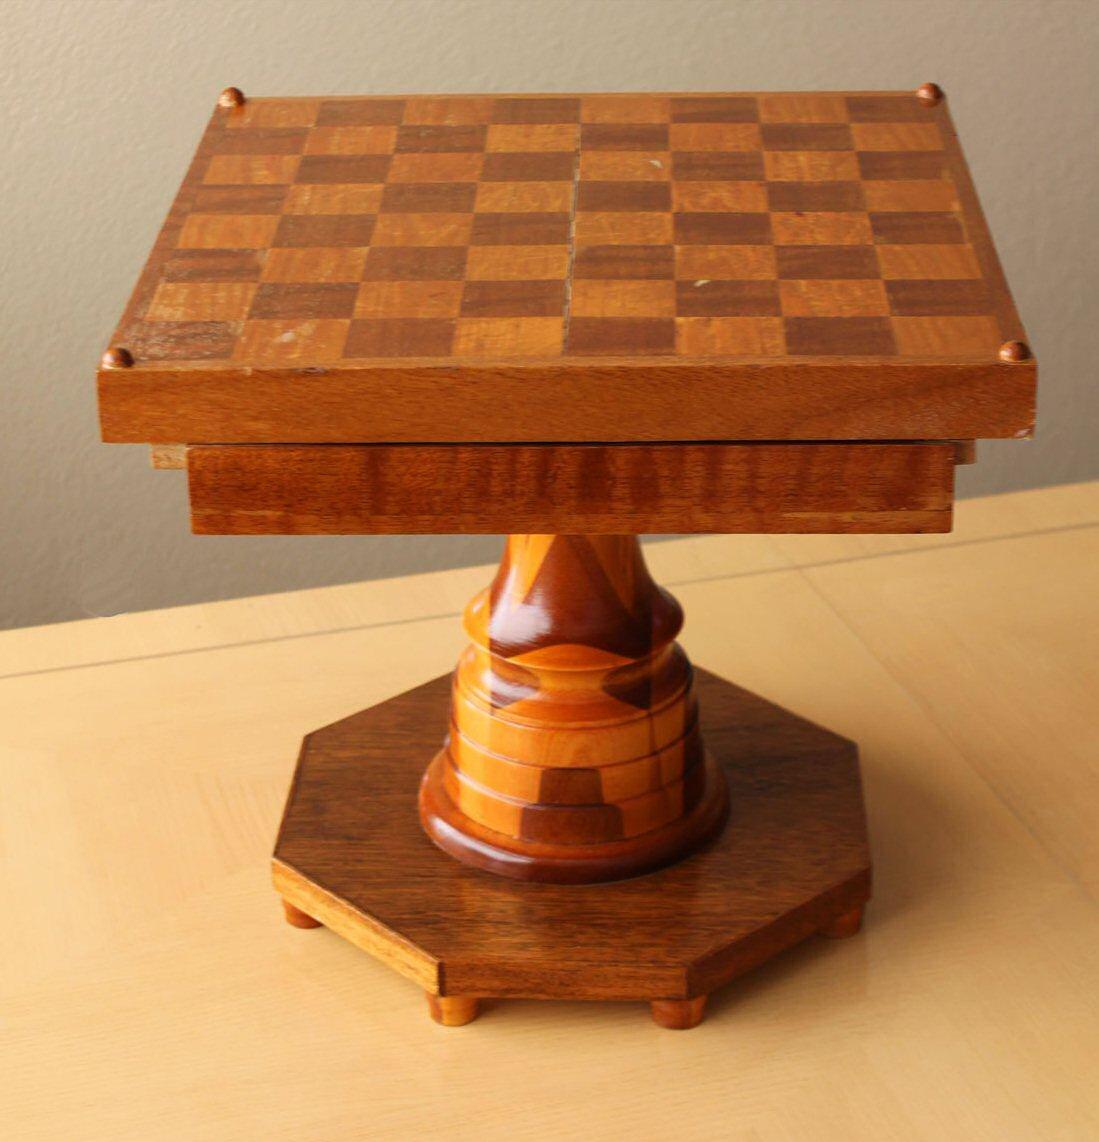 American  Handcarved & Crafted Mid Century Wood Chess Table!  Teak Maple Walnut Set 1950s For Sale